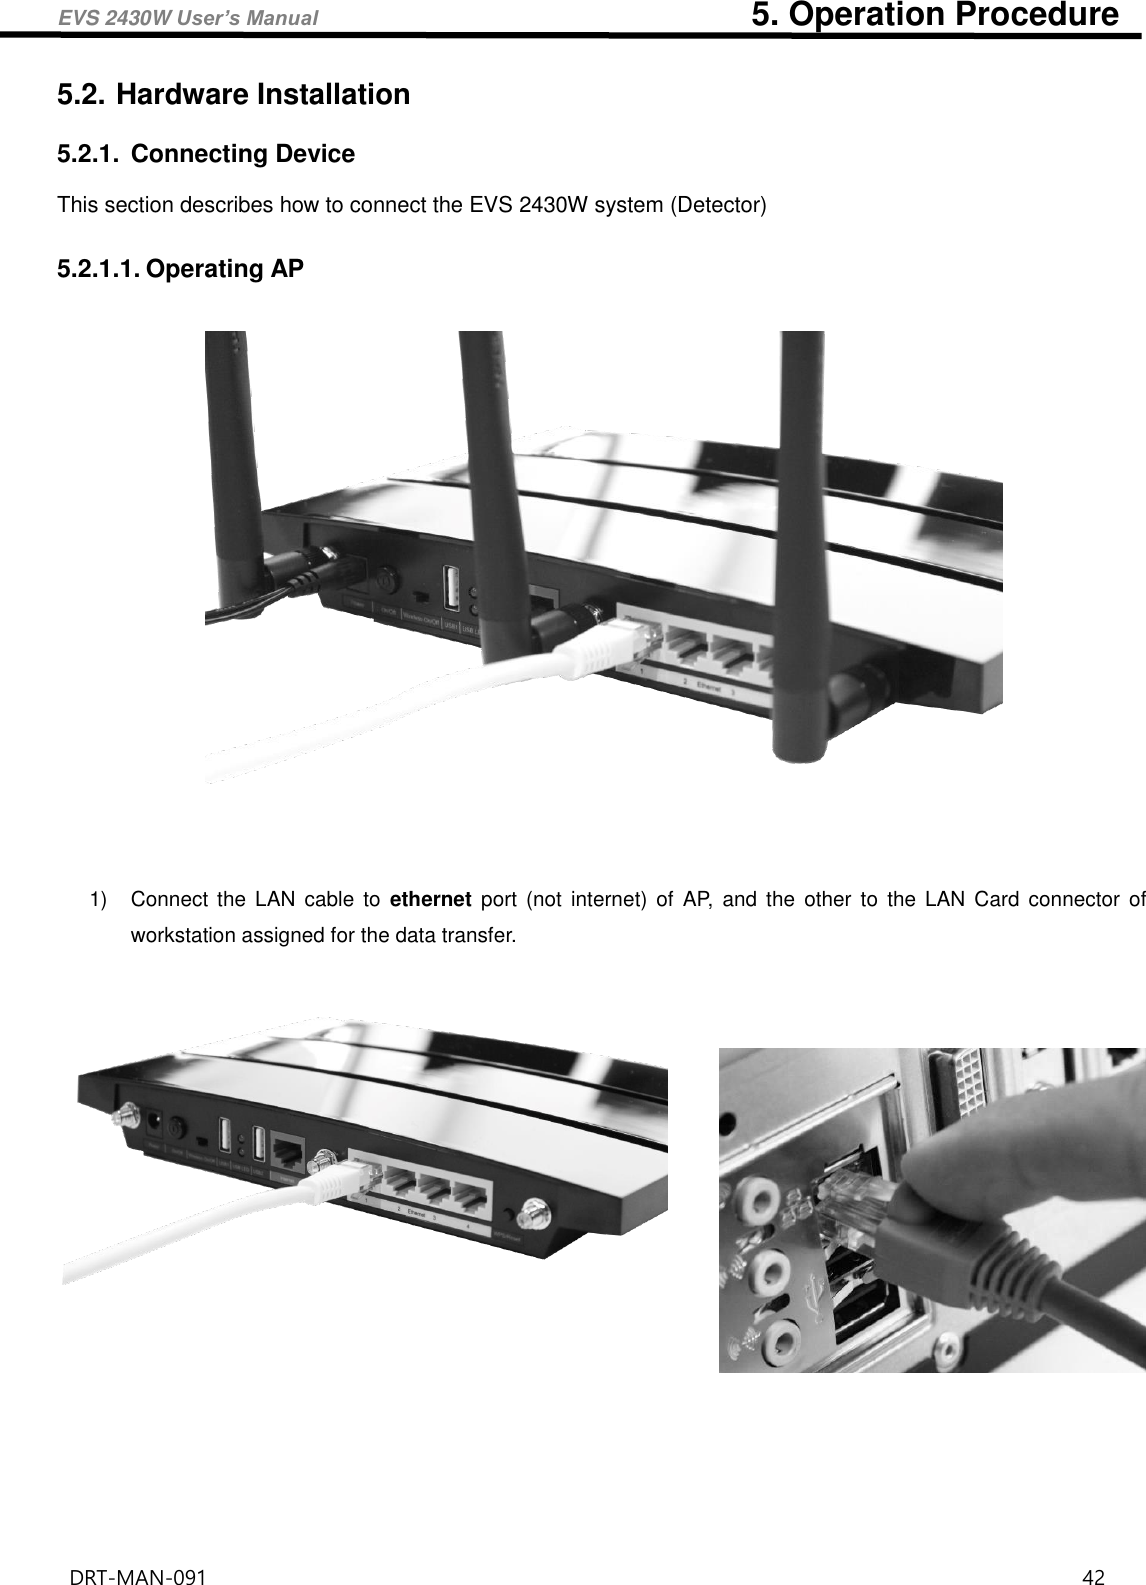 EVS 2430W User’s Manual                                                    5. Operation Procedure DRT-MAN-091                                                                                    42   5.2. Hardware Installation 5.2.1.  Connecting Device This section describes how to connect the EVS 2430W system (Detector)    5.2.1.1. Operating AP    1)  Connect  the  LAN cable  to  ethernet  port  (not  internet)  of  AP,  and  the  other  to  the  LAN  Card  connector  of workstation assigned for the data transfer.                